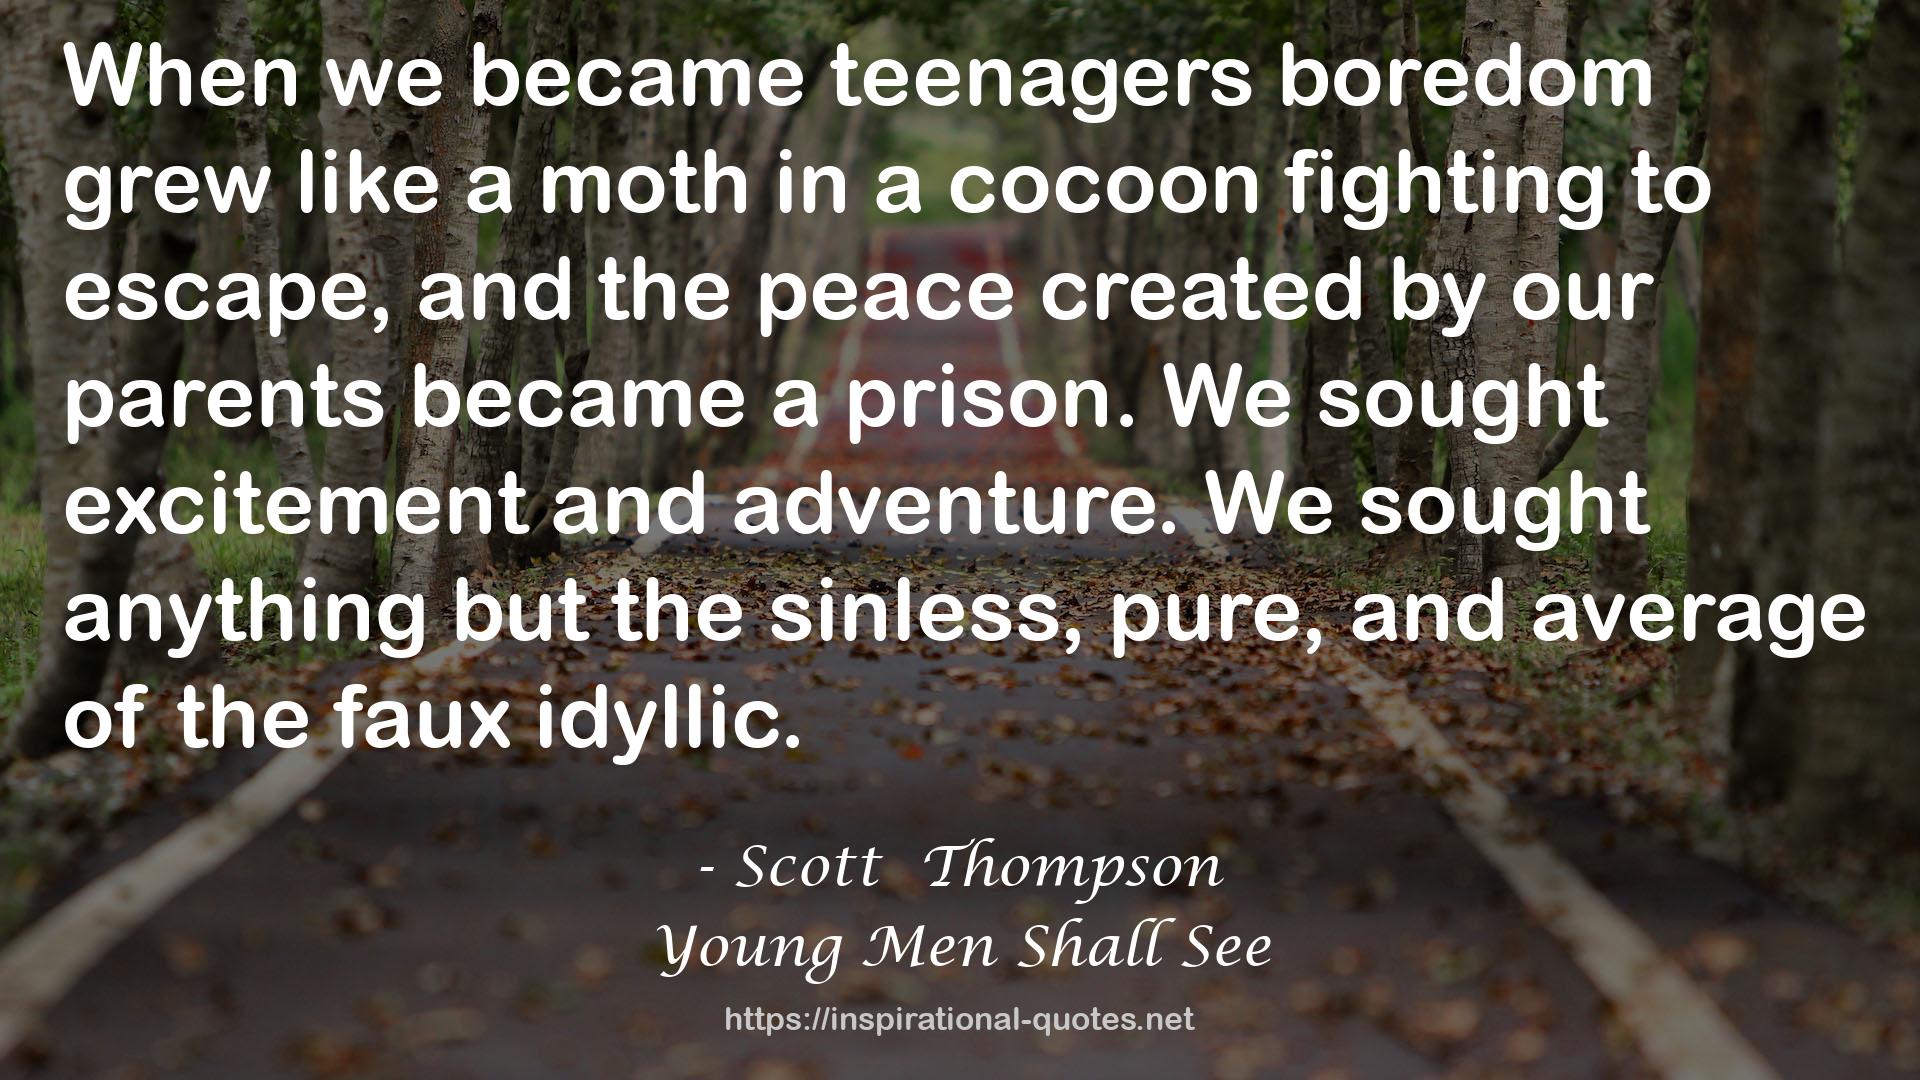 Young Men Shall See QUOTES